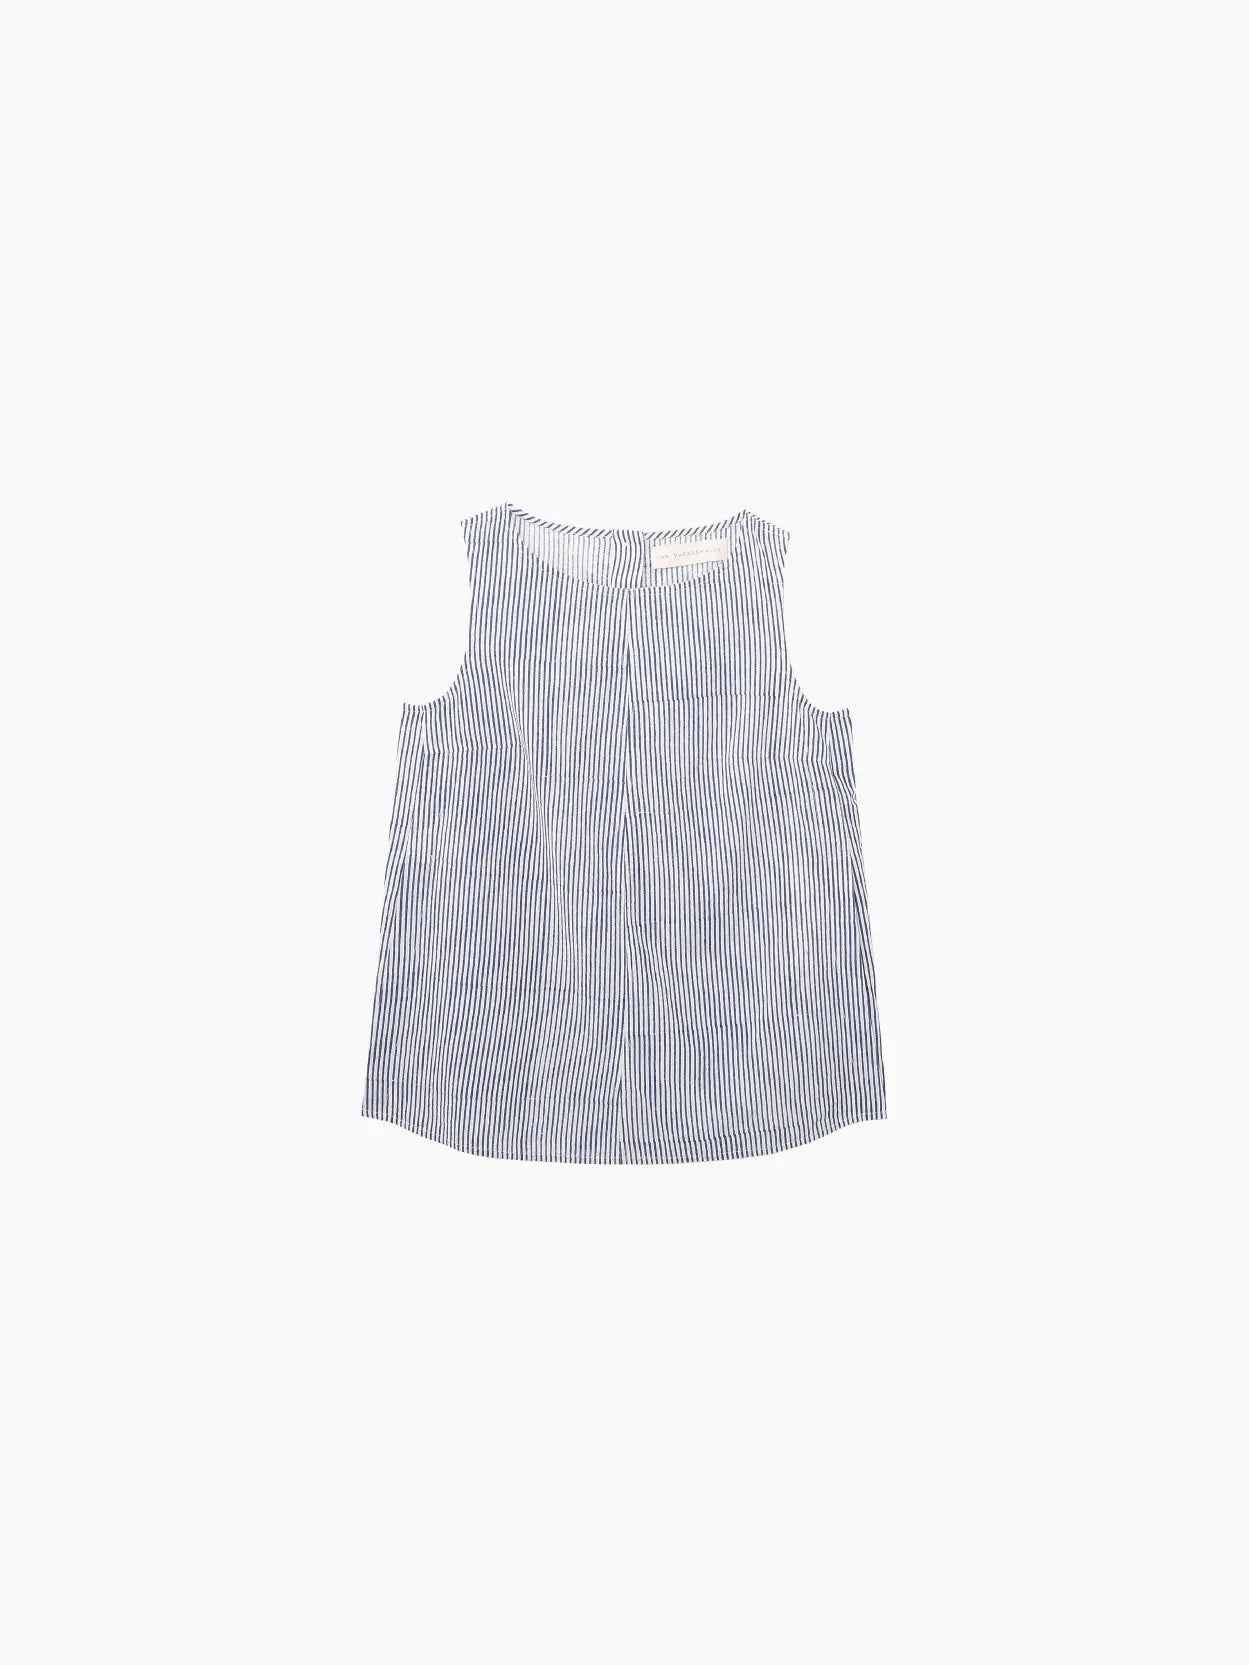 A sleeveless, blue and white vertical striped blouse is displayed on a plain white background. The Louise Top Block Print Stripe by Jan Machenhauer, available at Bassalstore in Barcelona, has a loose fit with a round neckline and a subtle, casual design.